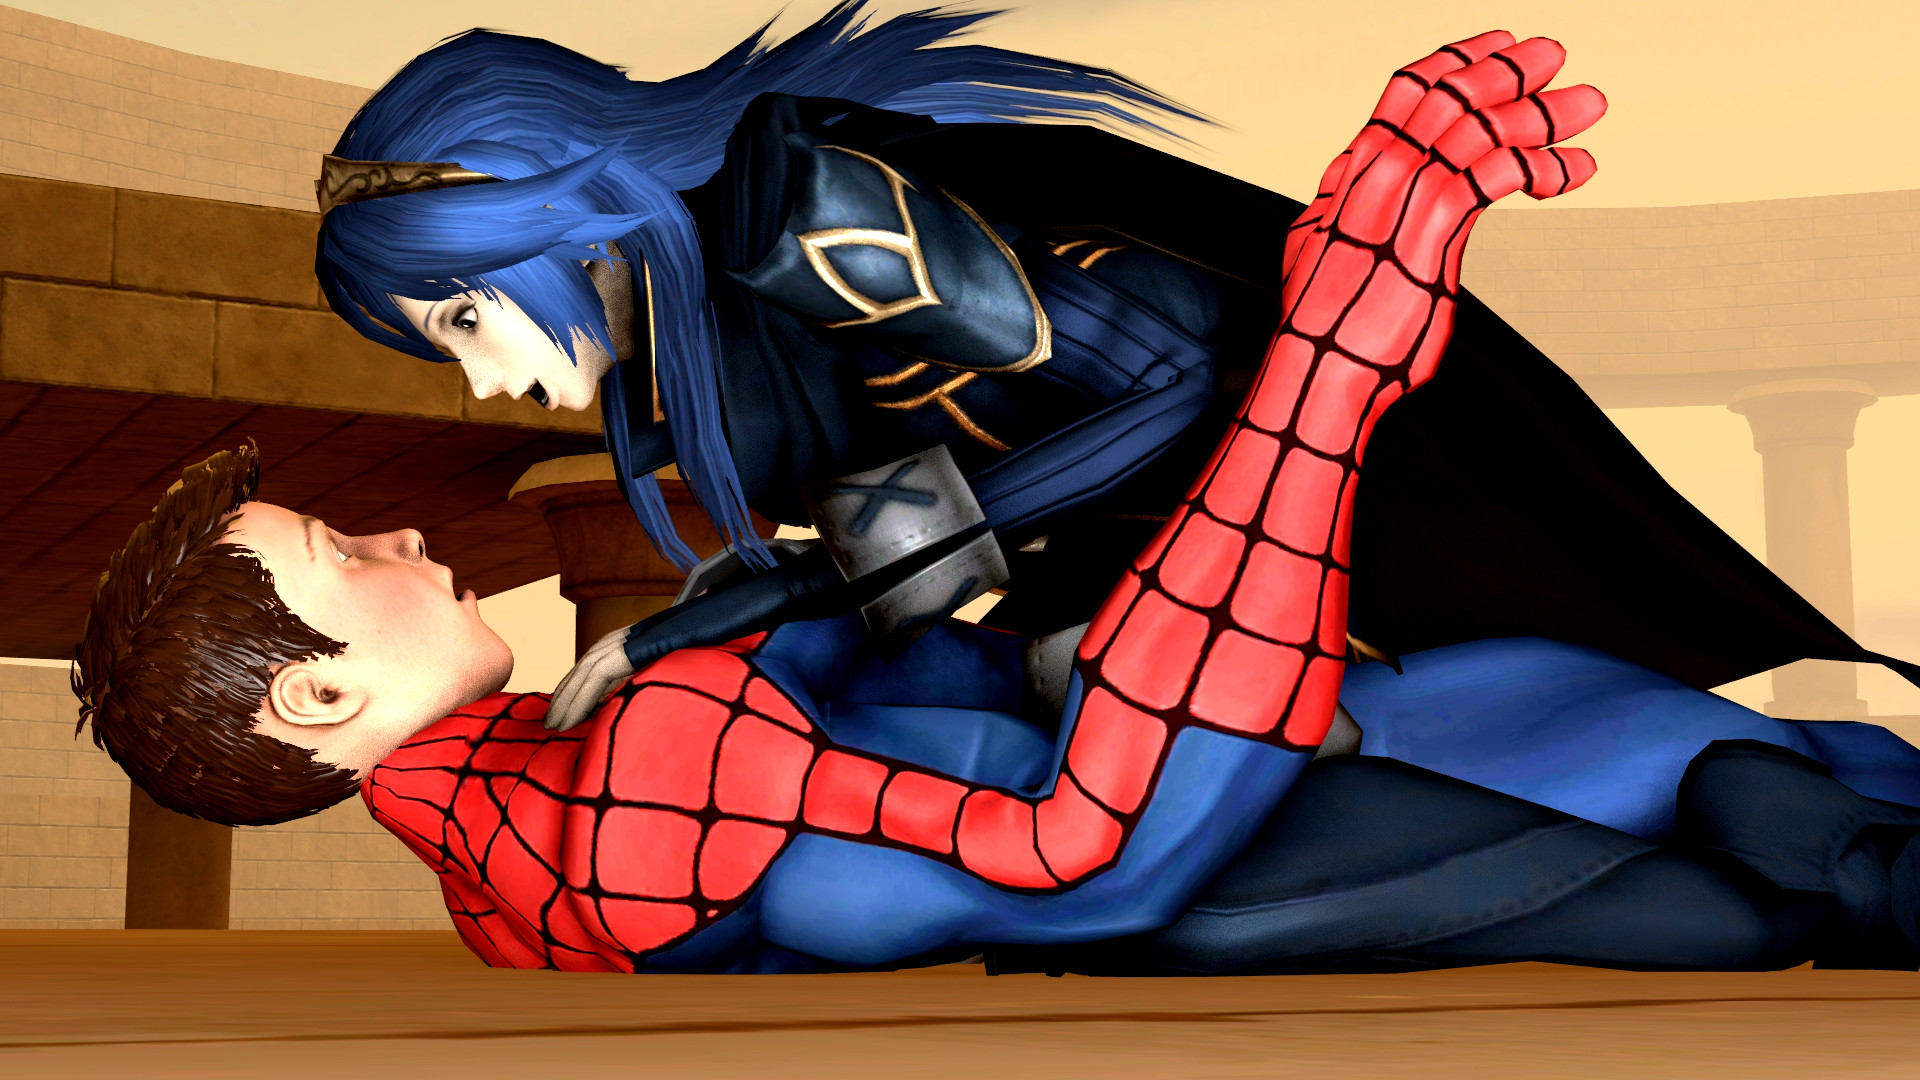 … Lucina and Spider-Man: where are your going cutie? by kongzillarex619